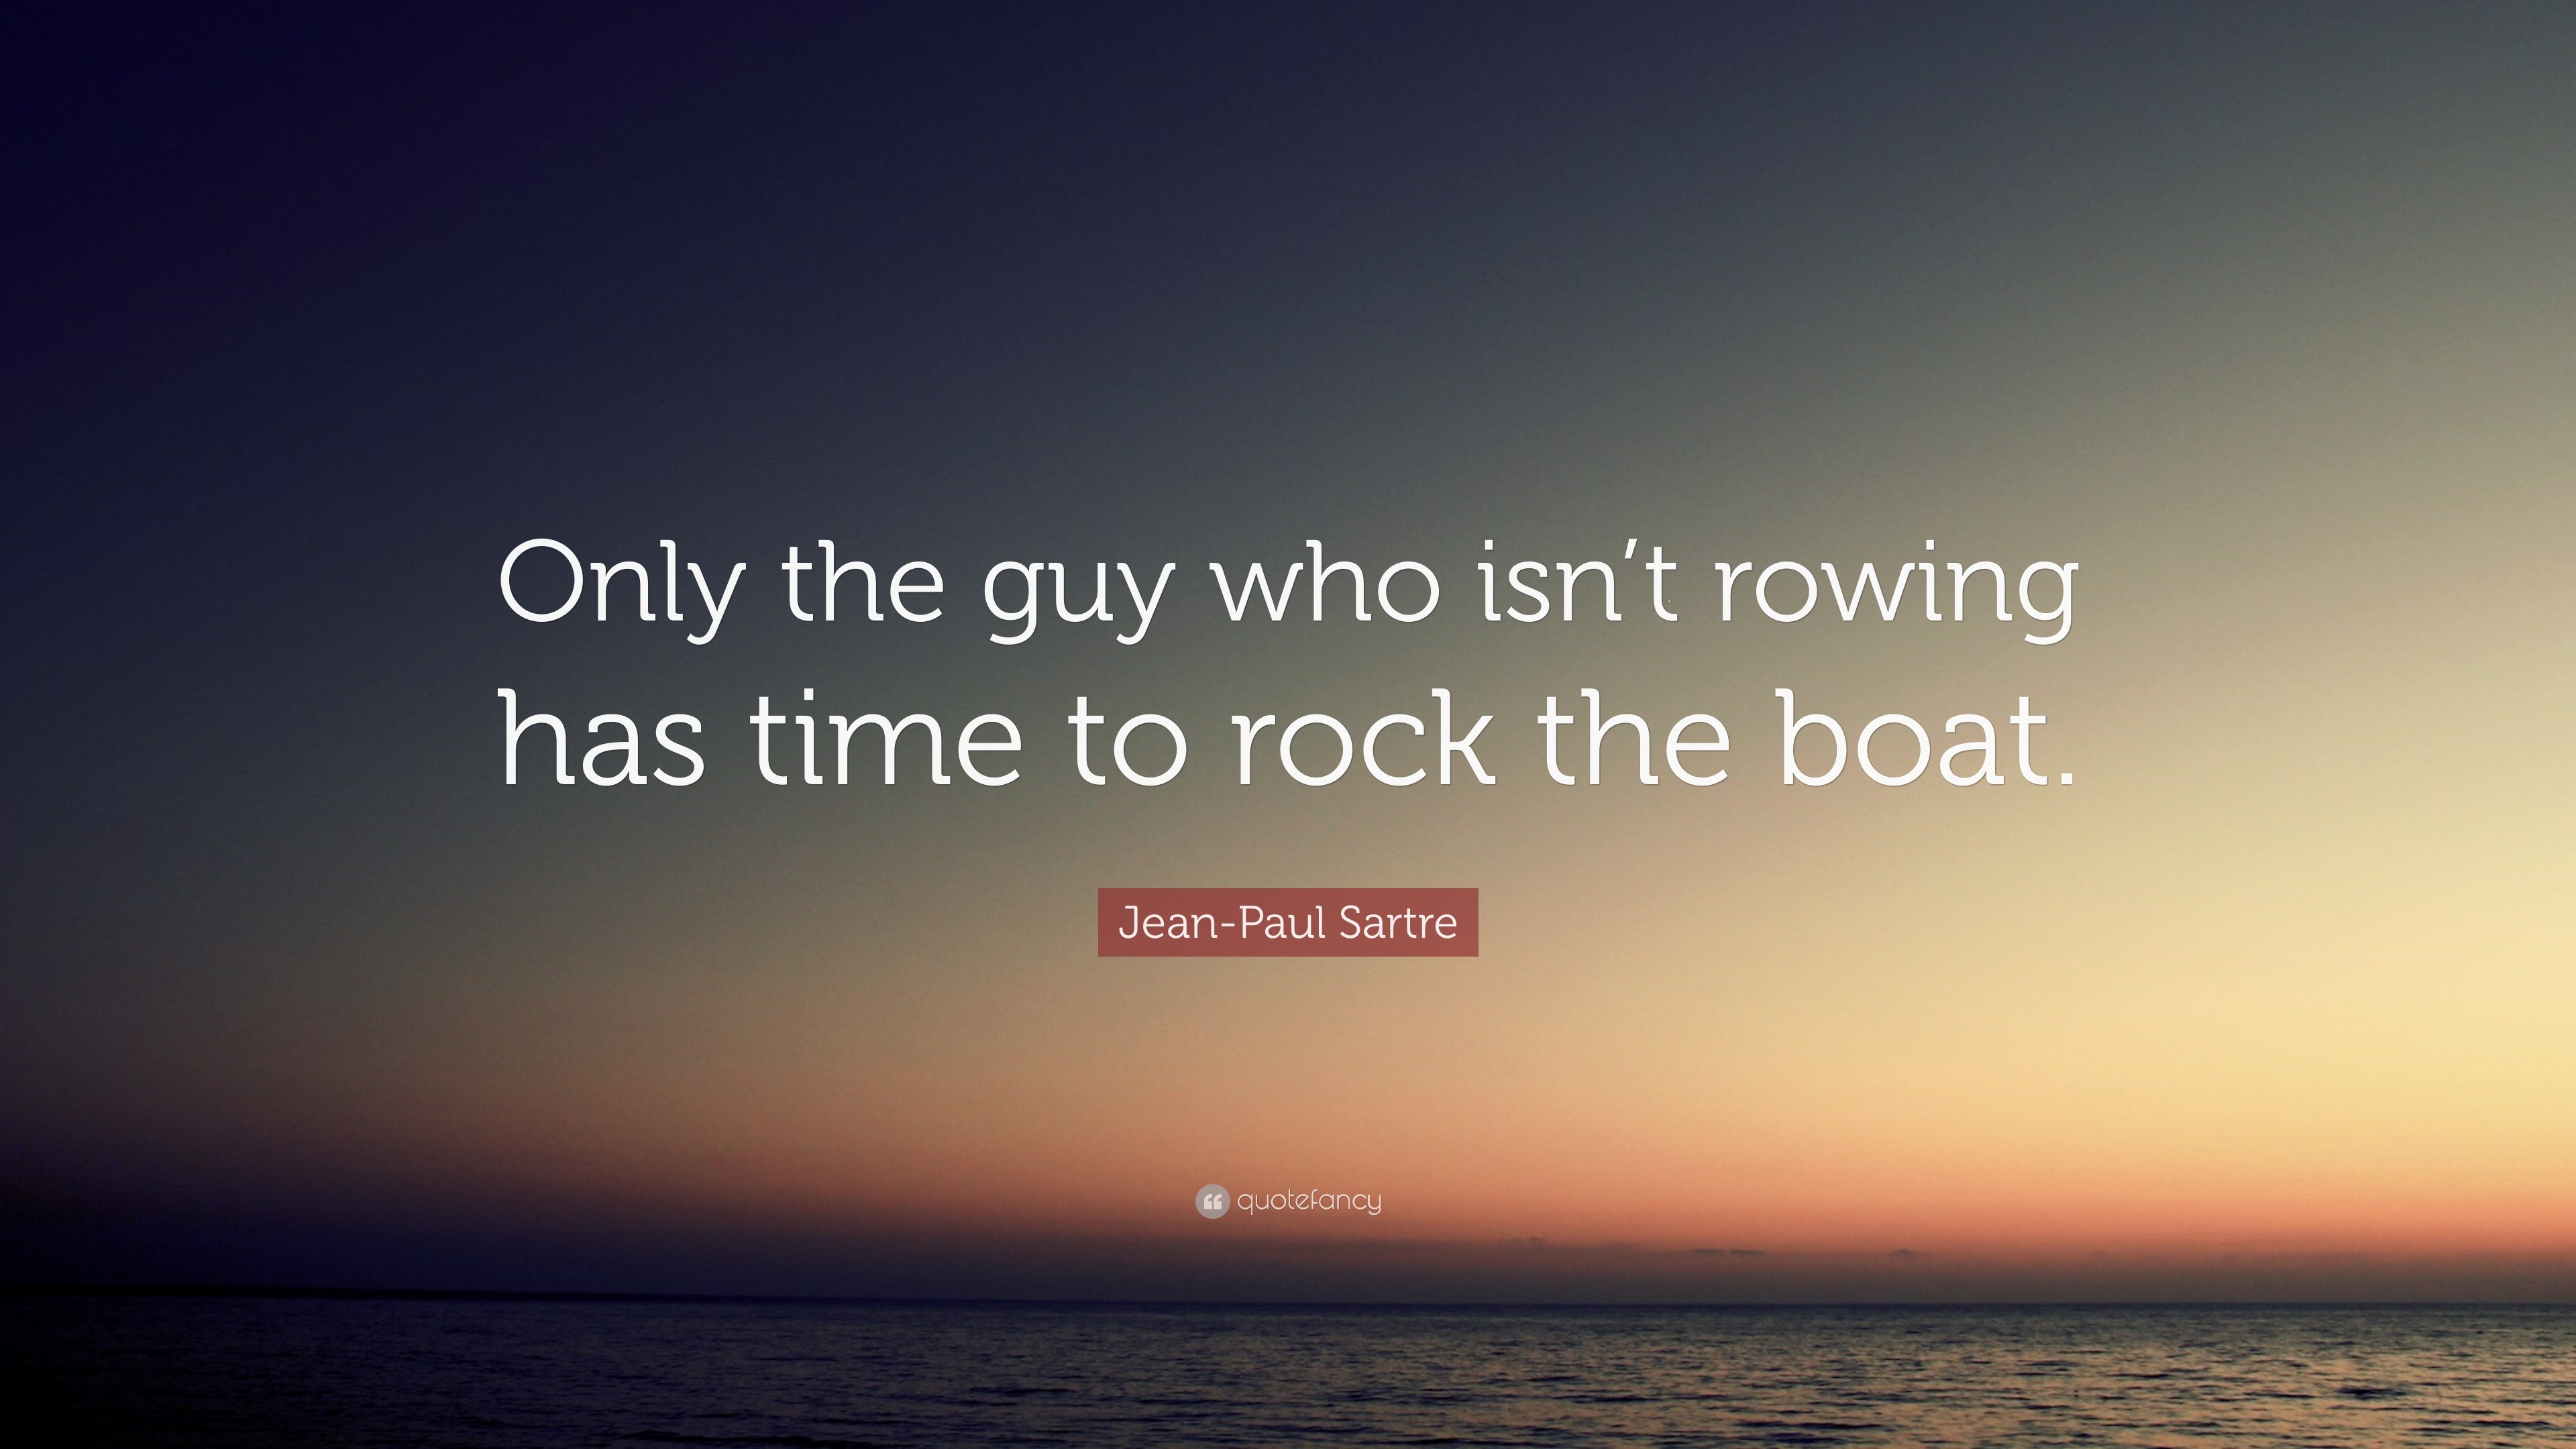 Jean-Paul Sartre Quote: “Only the guy who isn’t rowing has time to rock